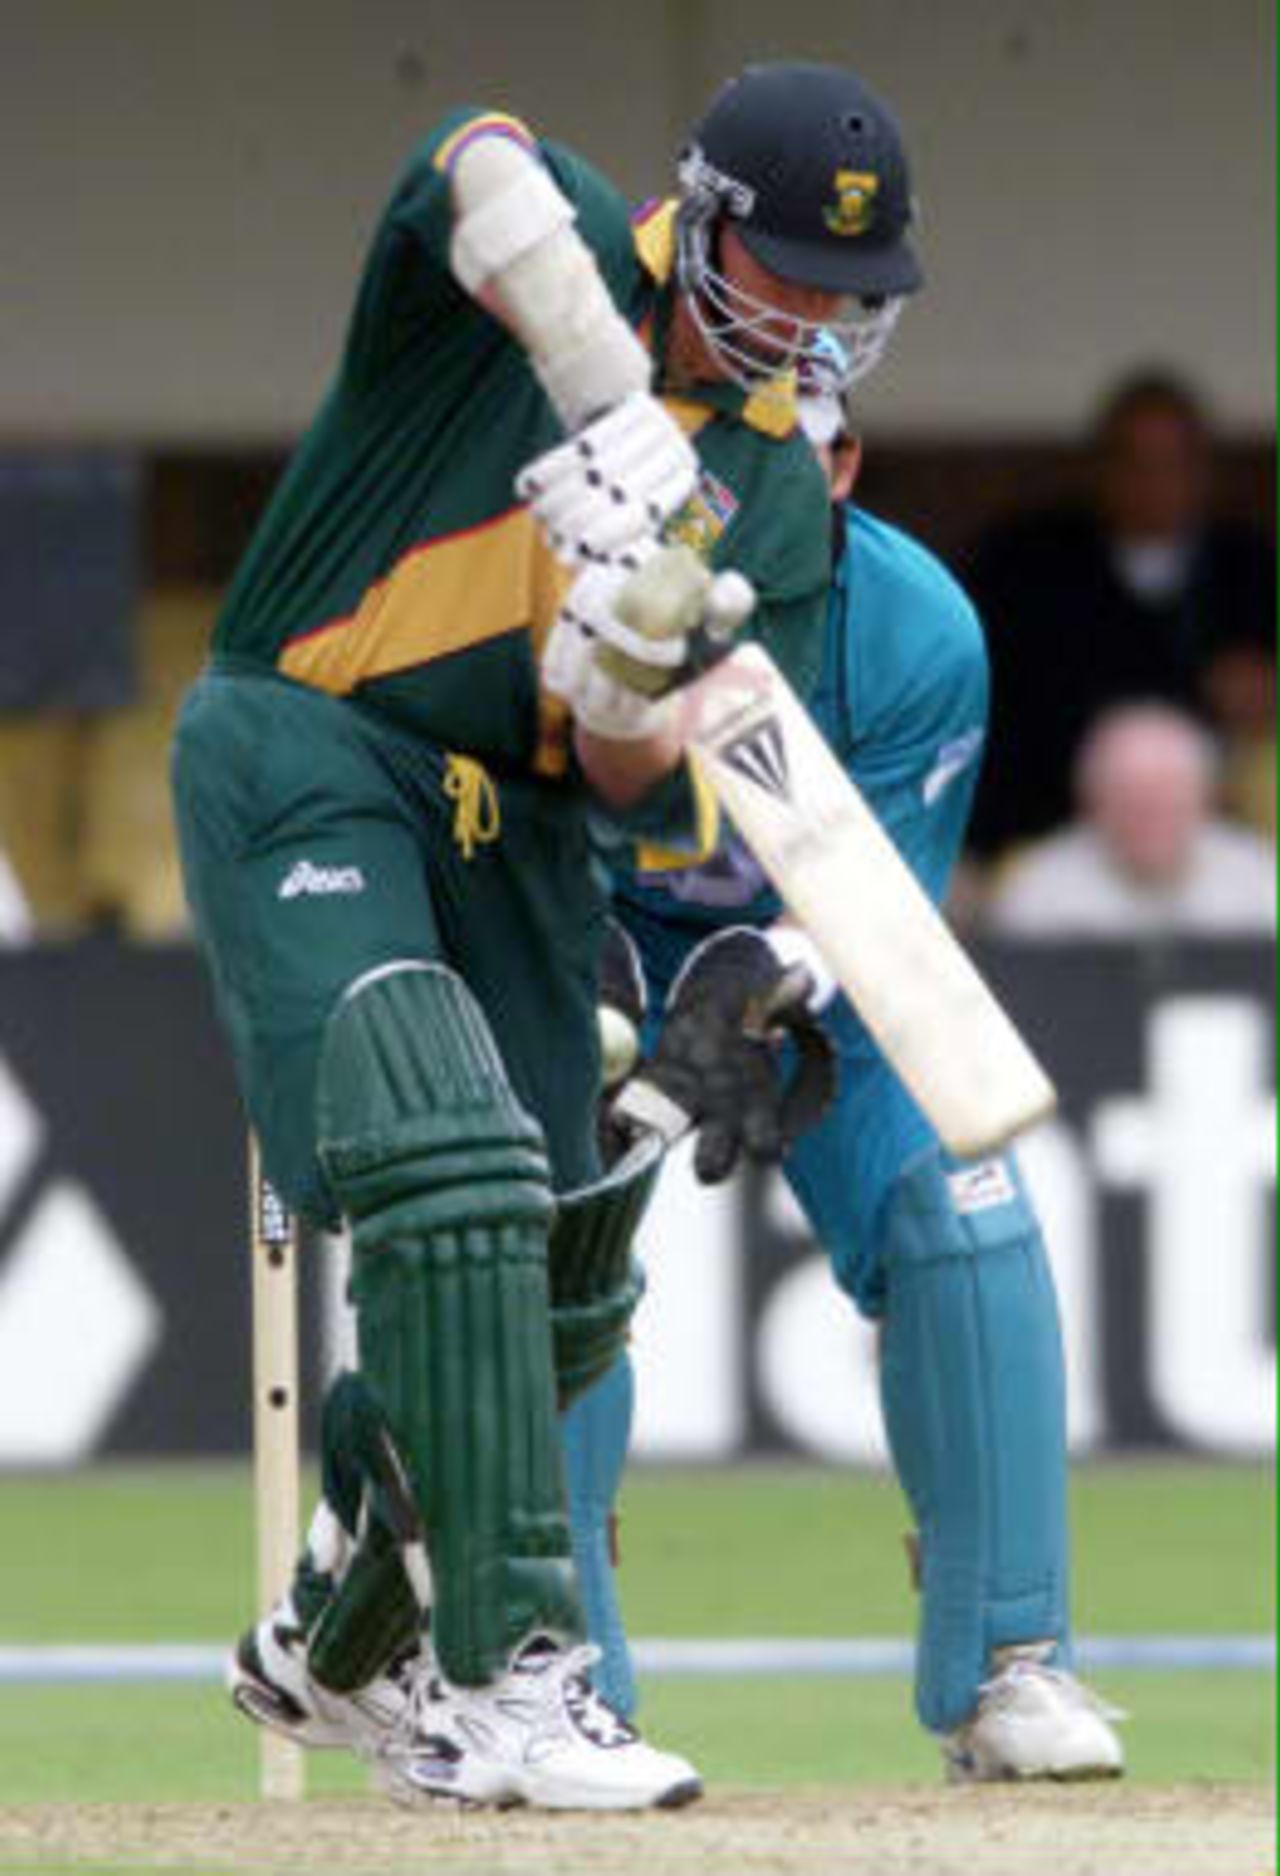 South Africa's Lance Klusener is bowled by New Zealand's Gavin Larsen 10 June 1999 during their Super Six match in the Cricket World Cup at Edgbaston